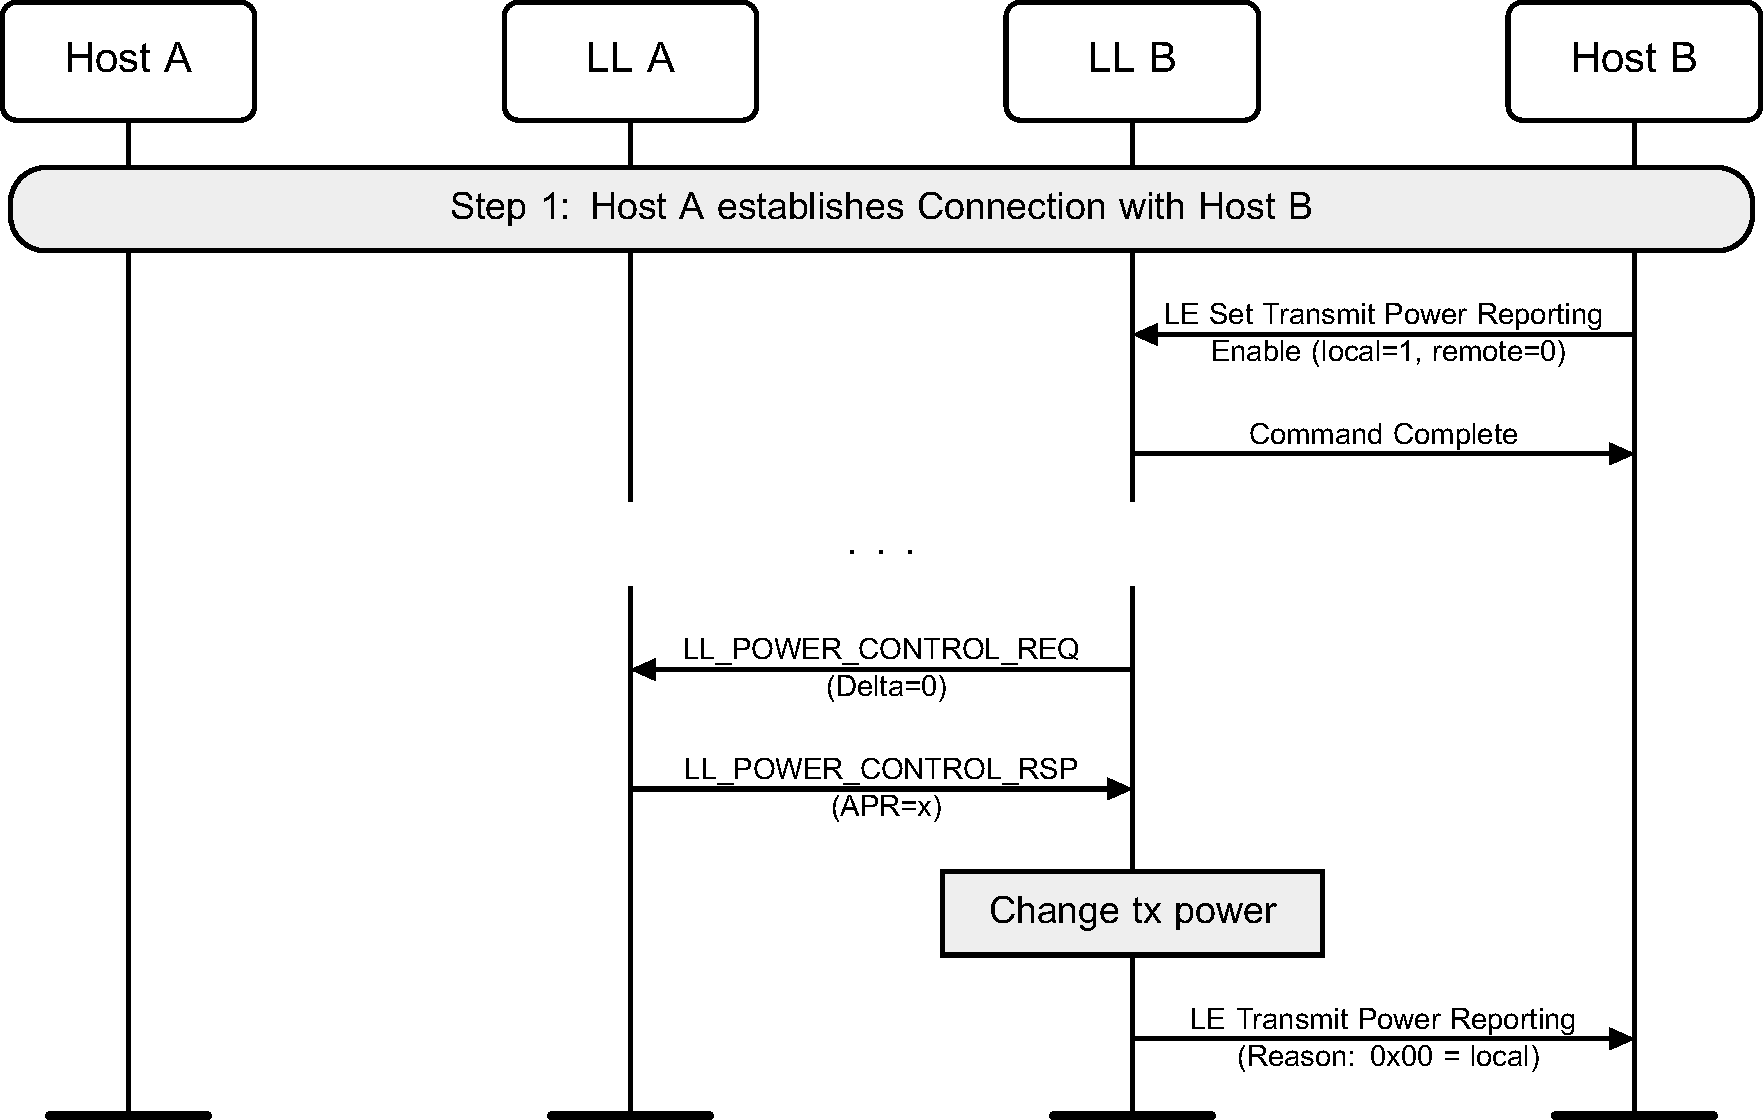 Power Control Request procedure to query Acceptable Power Reduction (APR) and transmitter Update